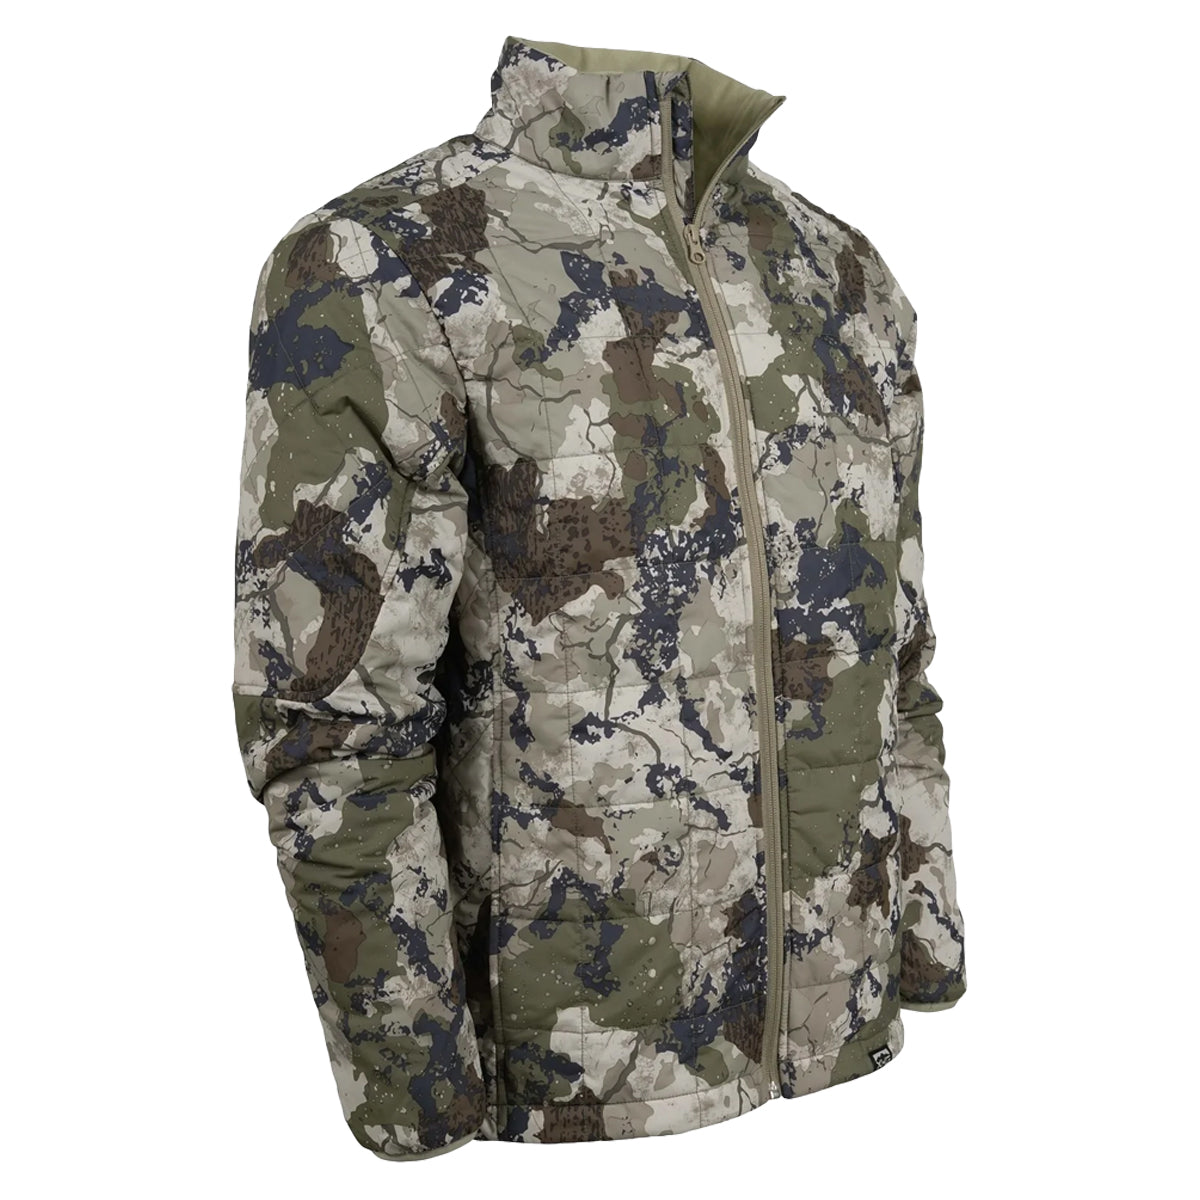 King's XKG Transition Thermolite Jacket in XK7 by GOHUNT | King's - GOHUNT Shop